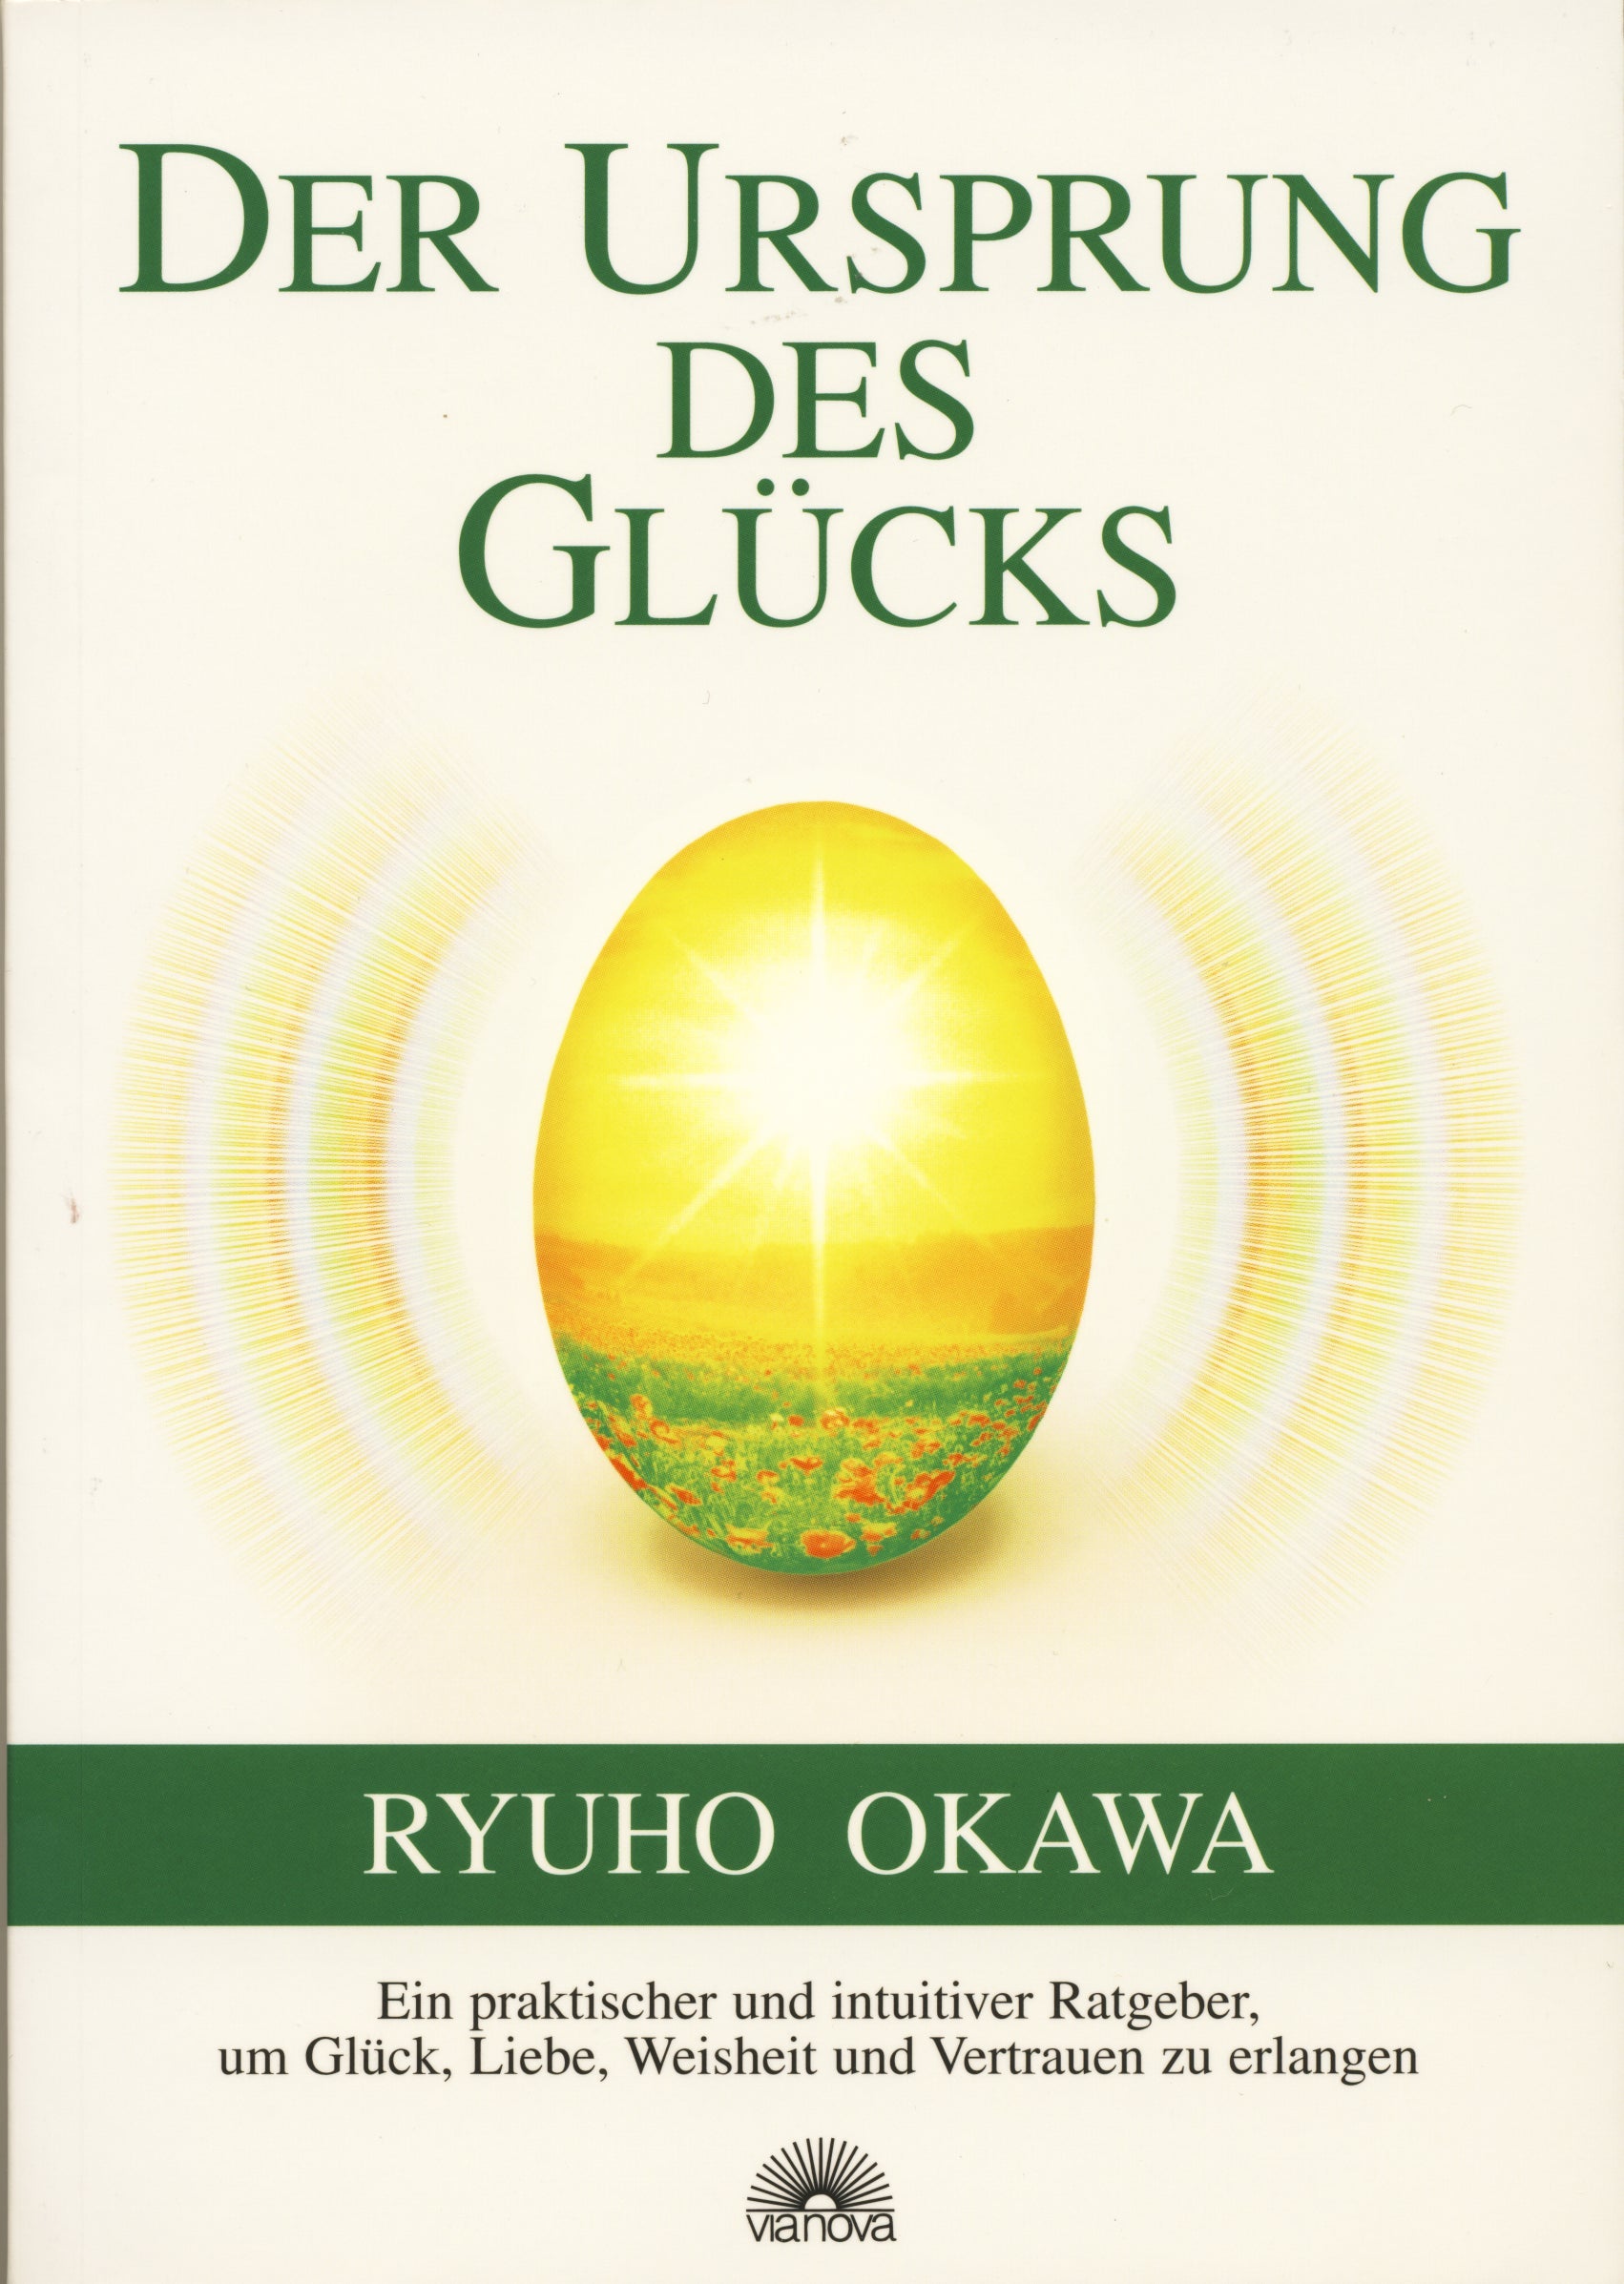 Book, The Starting Point of Happiness : An Inspiring Guide to Positive Living with Faith, Love, and Courage, Ryuho Okawa, German - IRH Press International